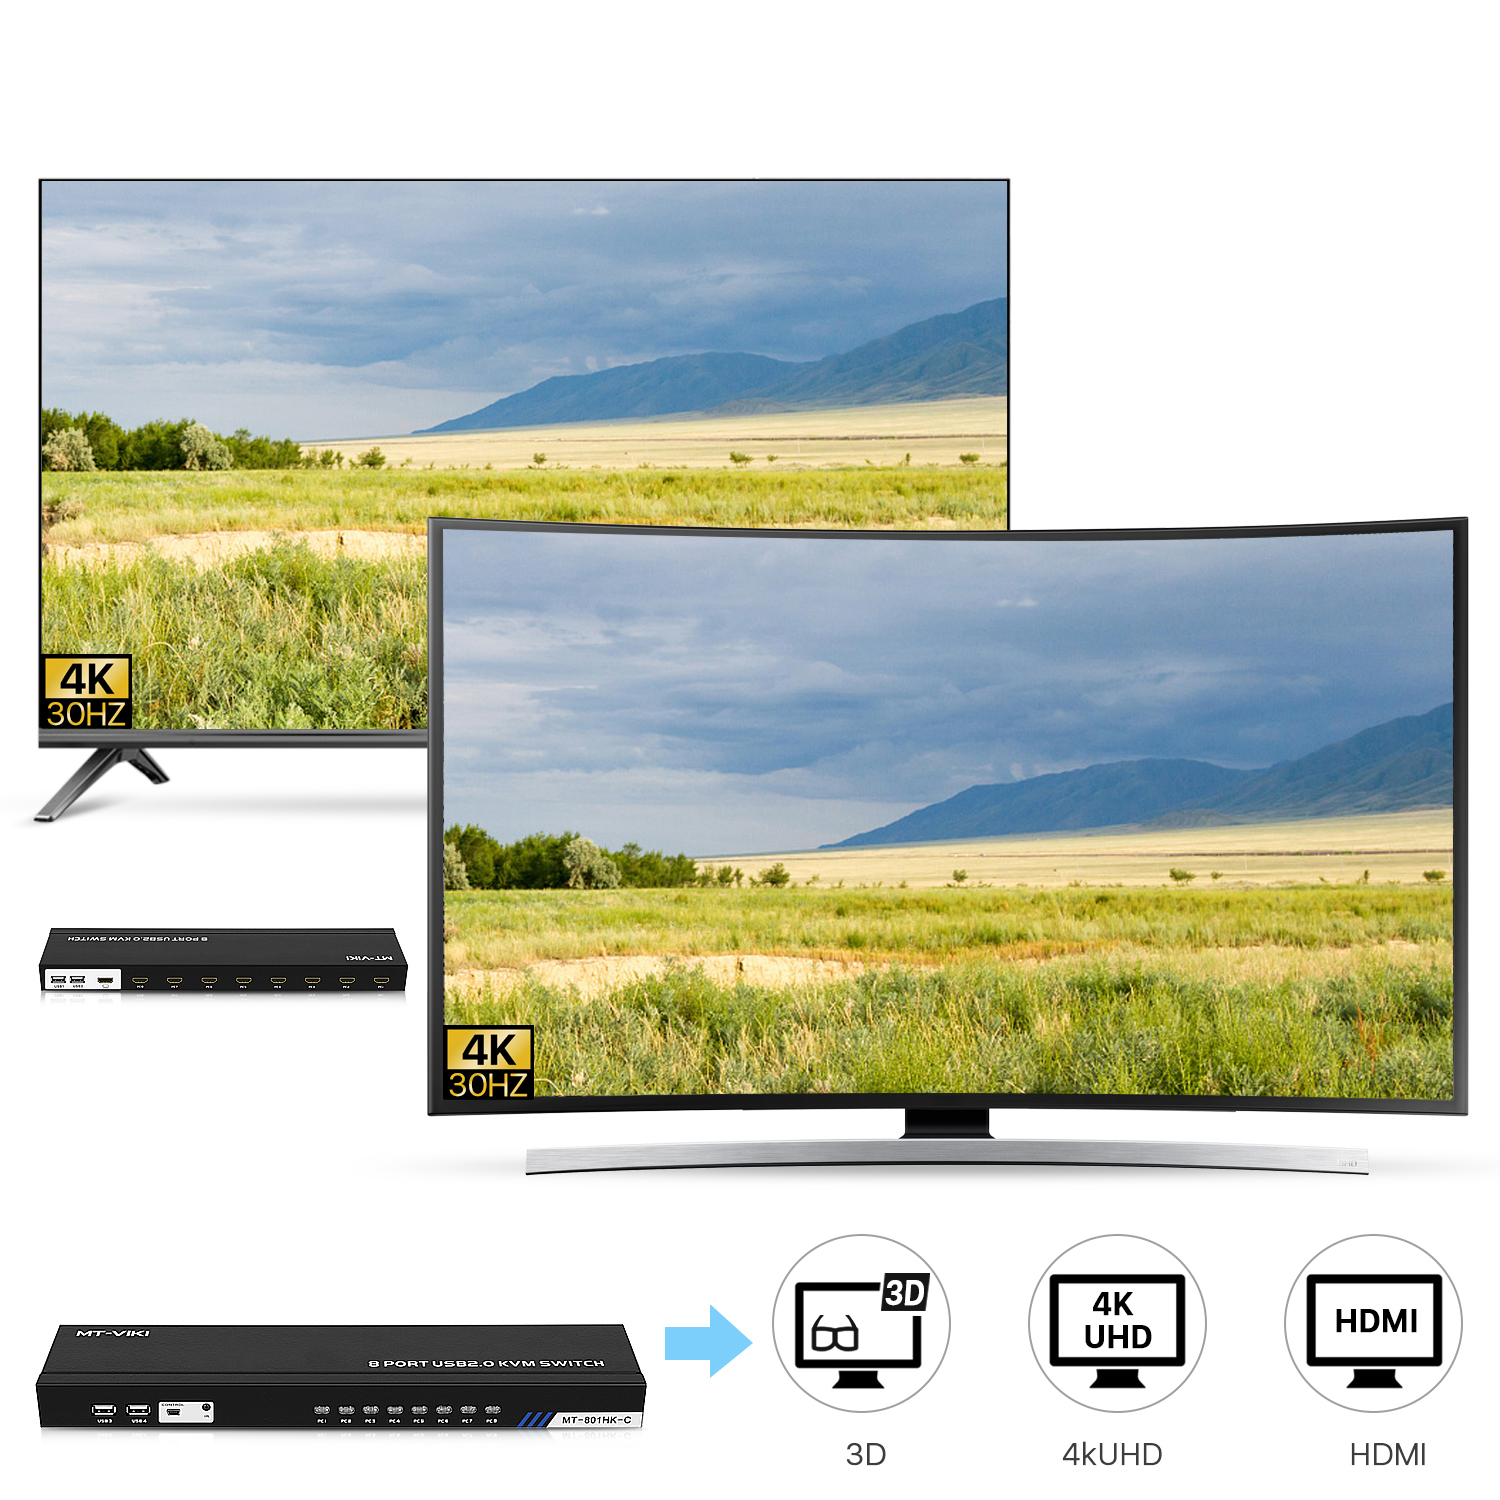 3-Switching Method -  4K KVM switch 8 port Box helps you switch between devices without any hassle with the help of control buttons on the front panel, an external desktop controller, and an IR remote